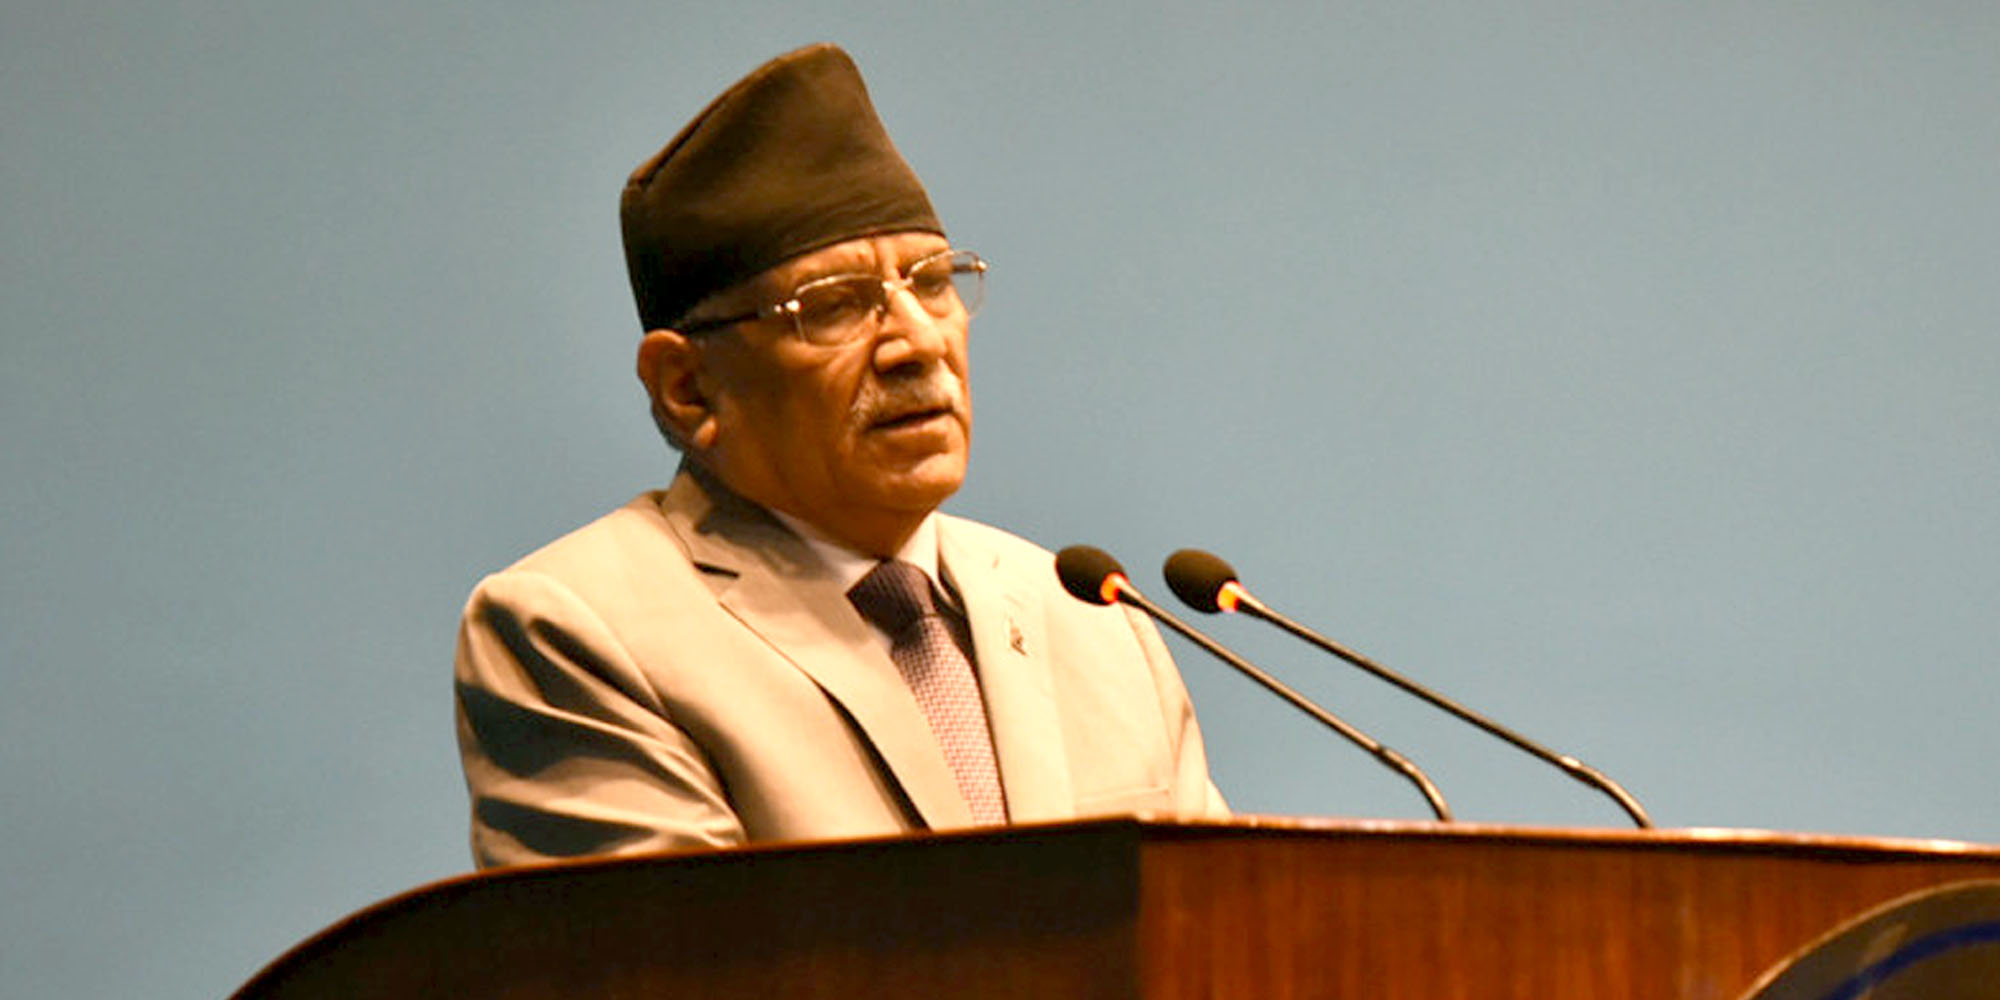 Sport strengthens people-to-people relations, Dahal says